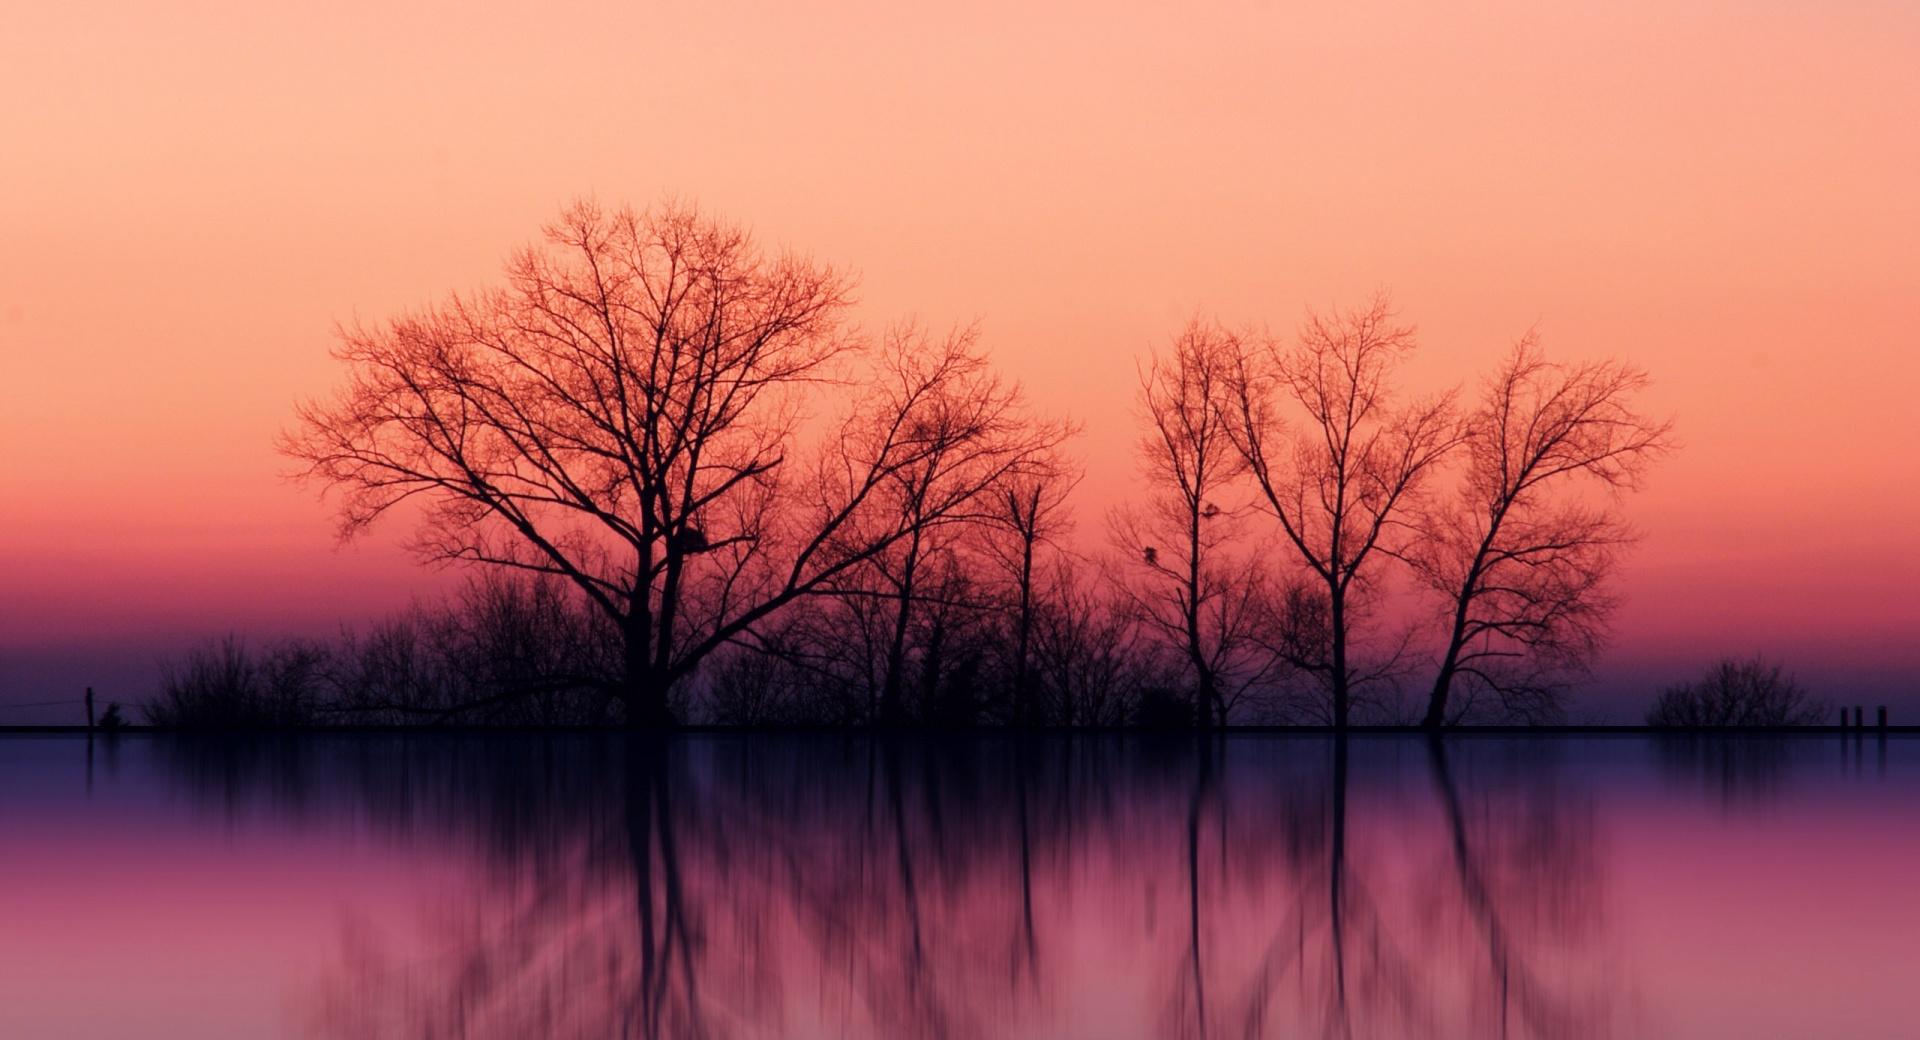 Trees At Dusk wallpapers HD quality